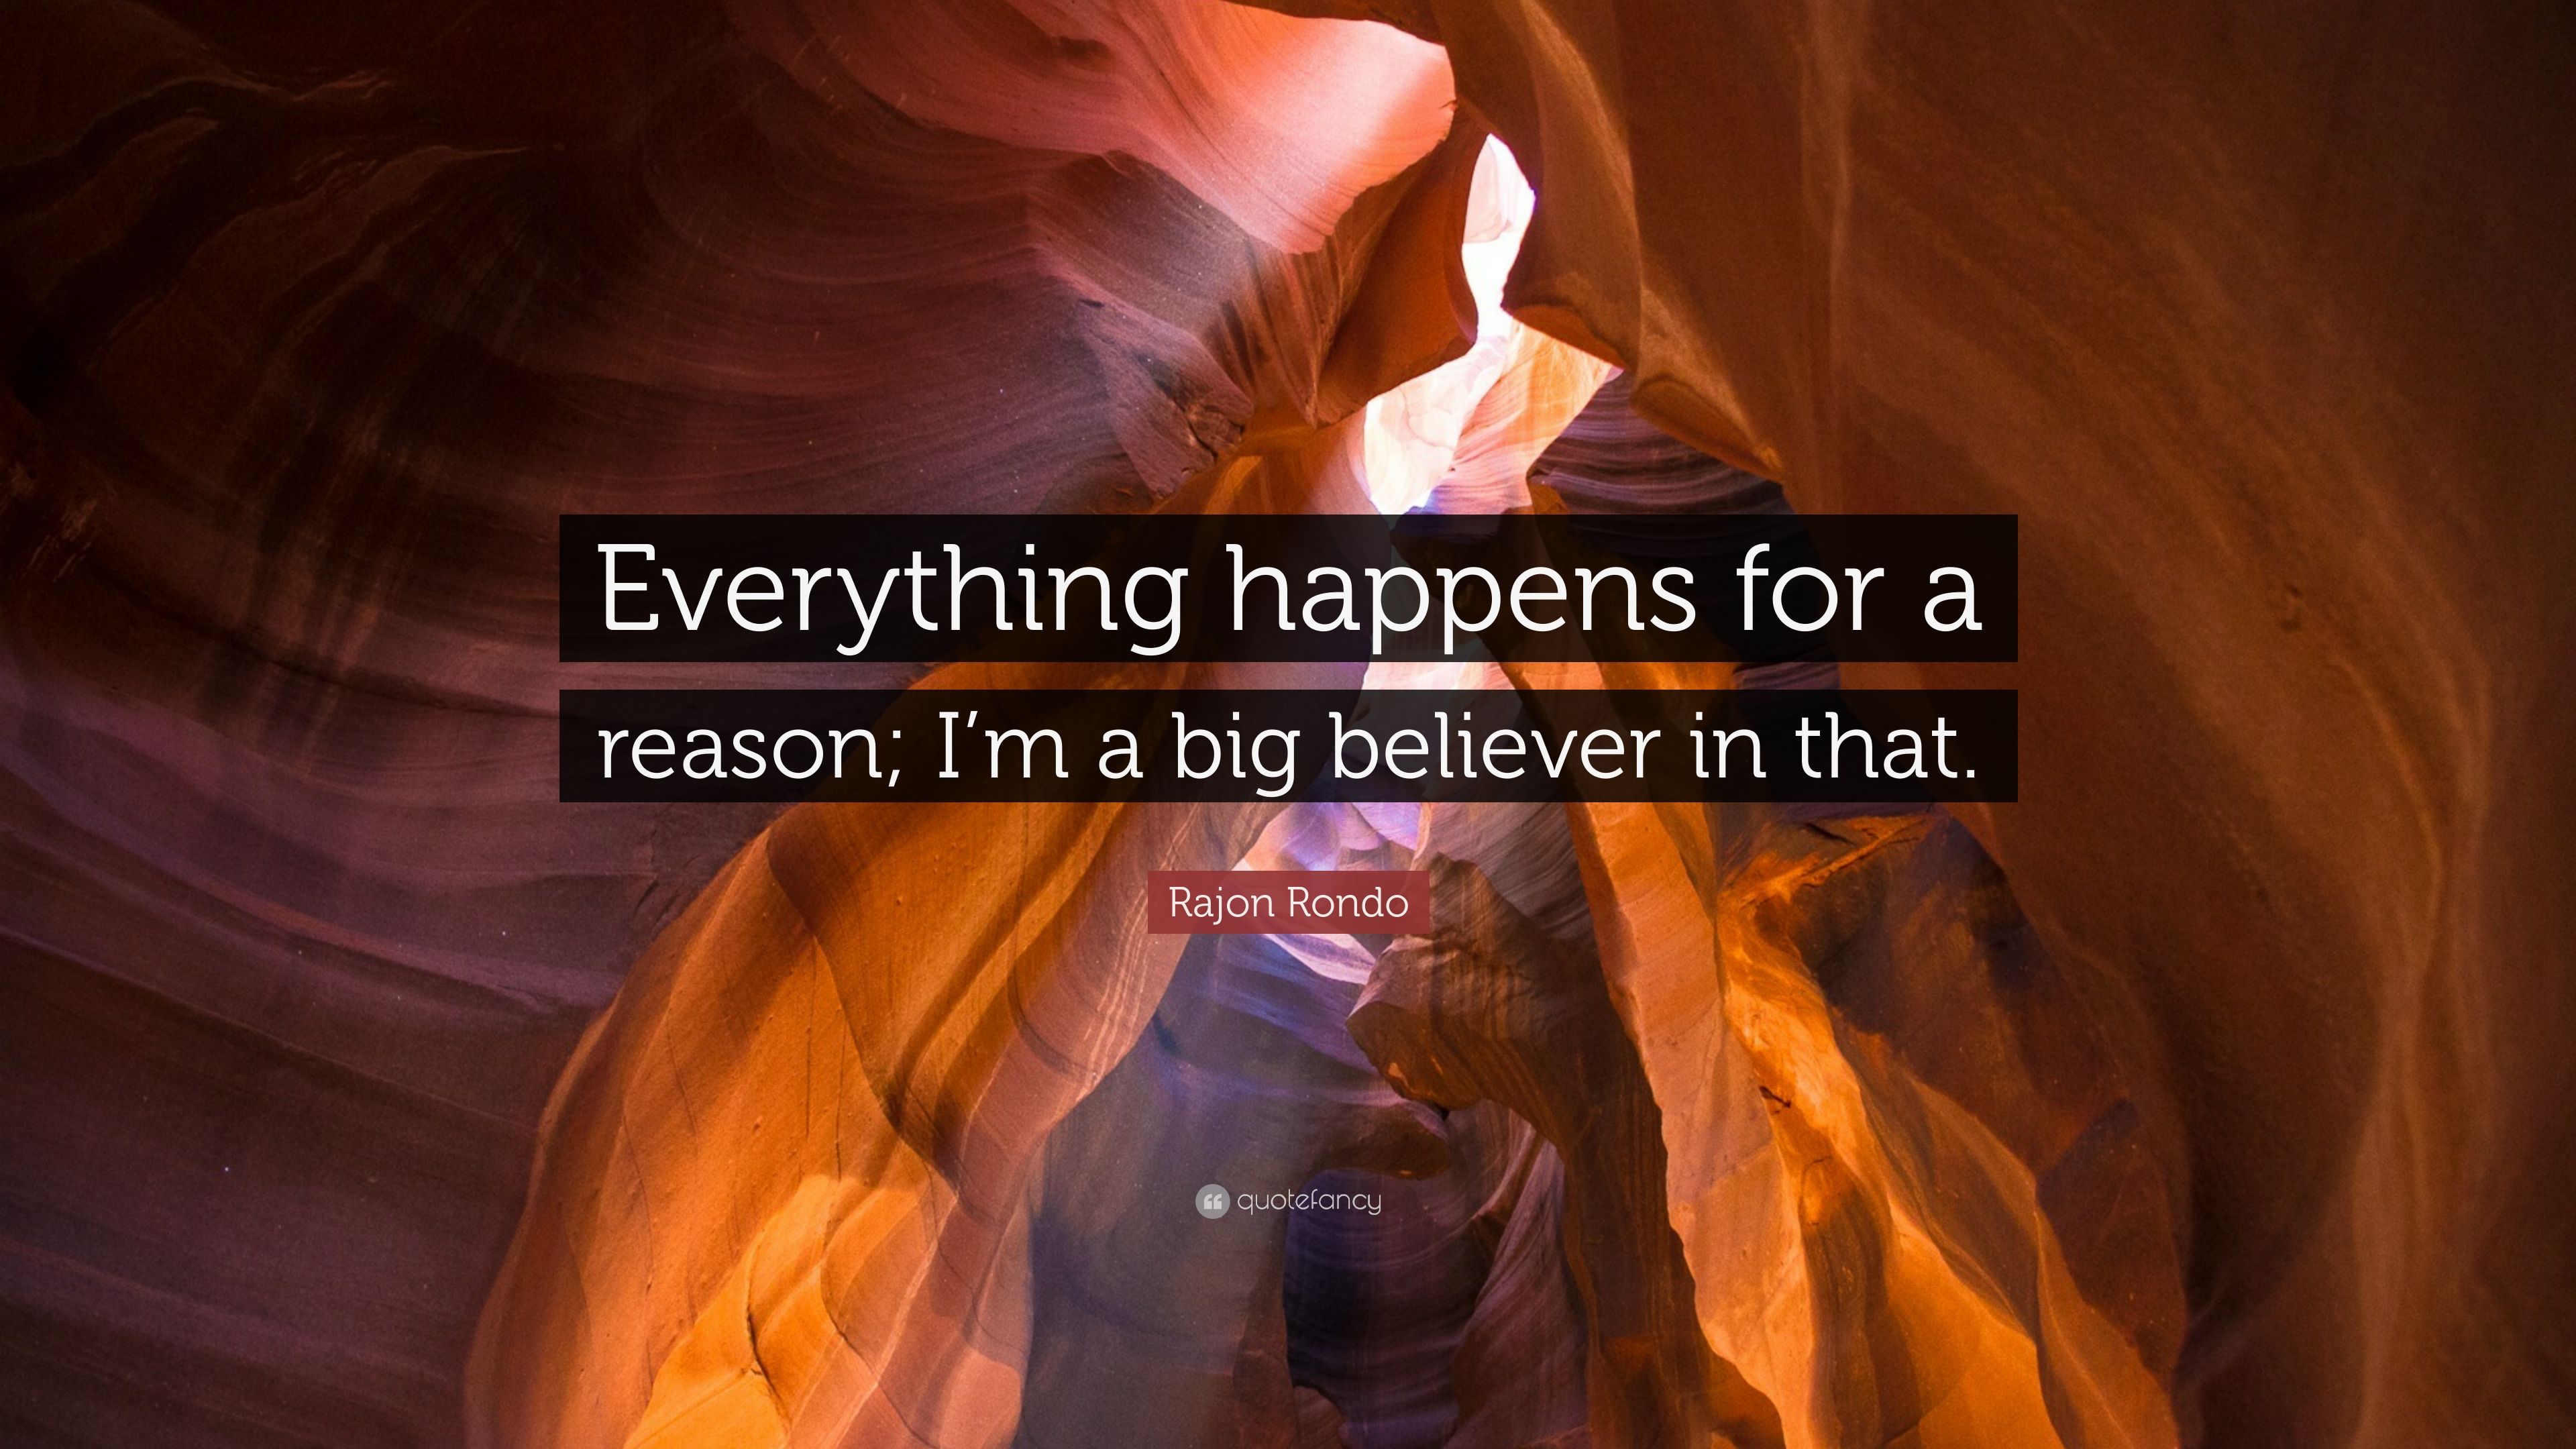 Rajon Rondo Quote: “Everything happens for a reason; I'm a big believer in that.”